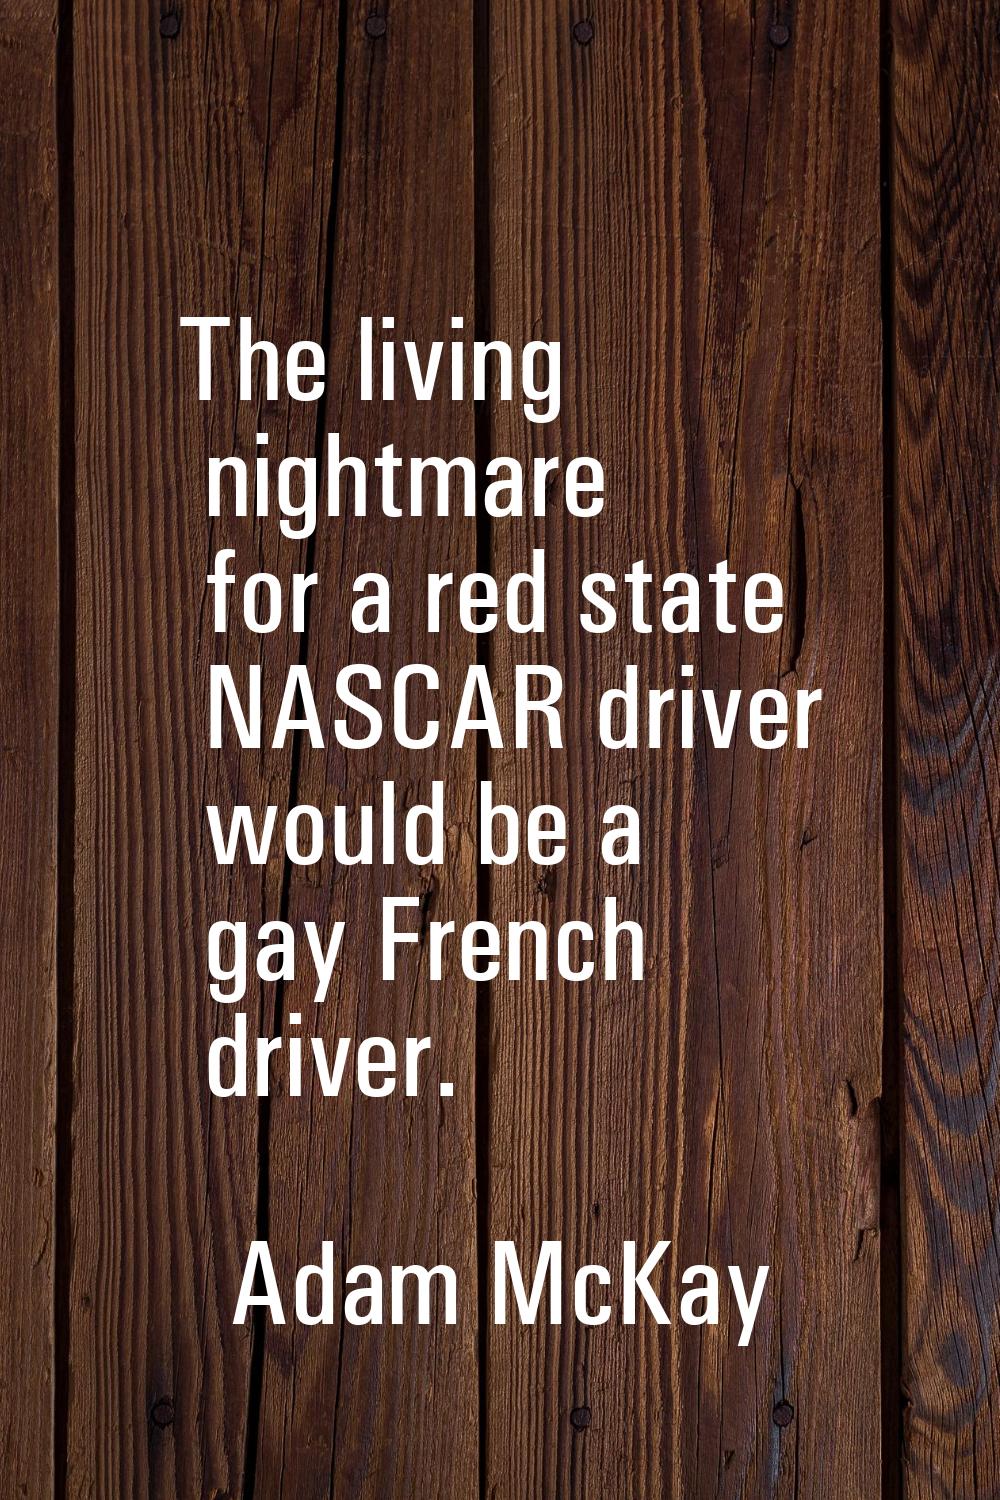 The living nightmare for a red state NASCAR driver would be a gay French driver.